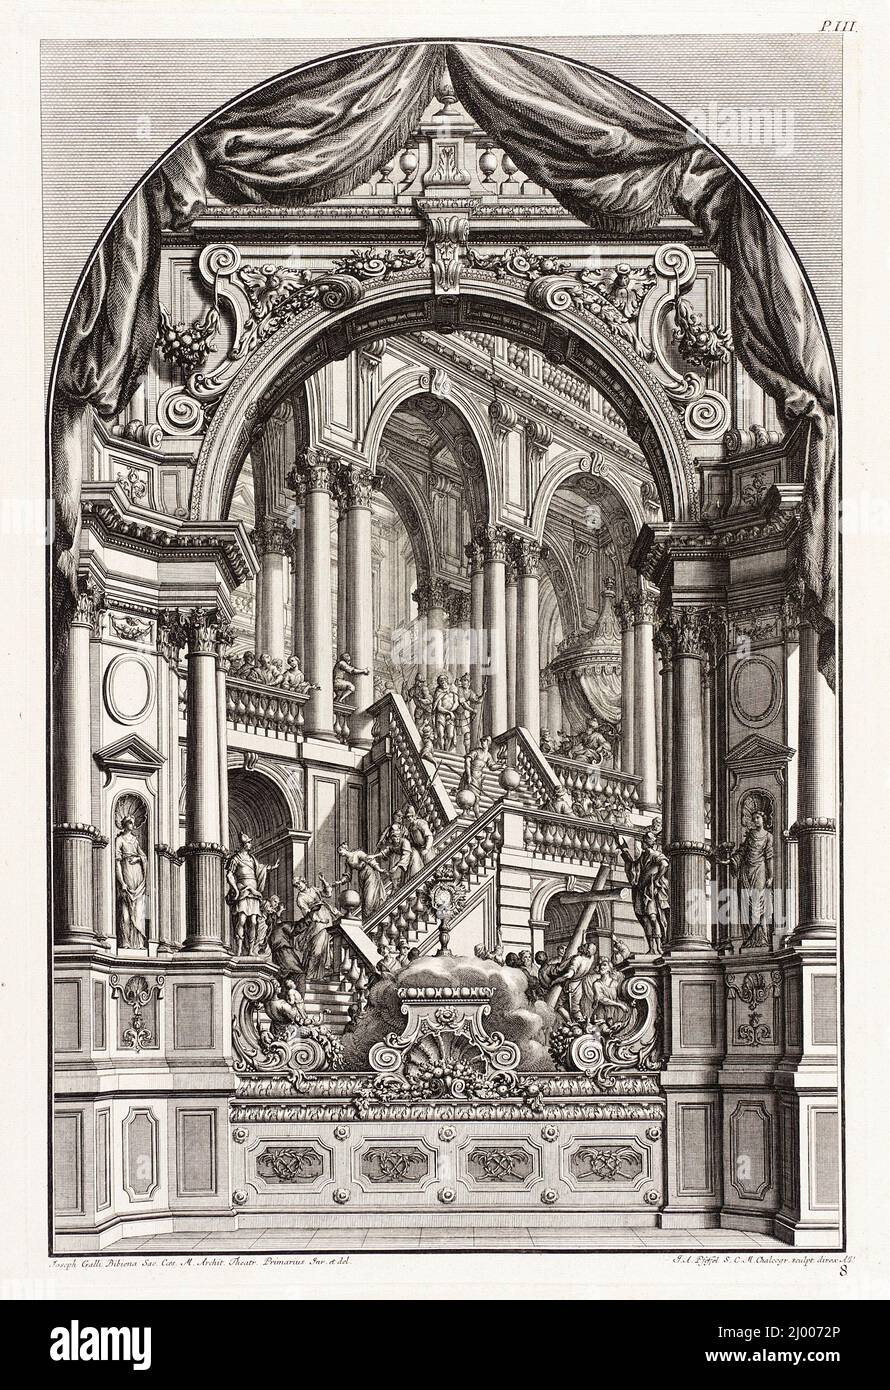 Christ Descending the Stairs. Johann Andreas Pfeffel I (Germany, Bischoffingen, 1674-1748). Germany, circa 1740. Prints; engravings. Engraving Stock Photo